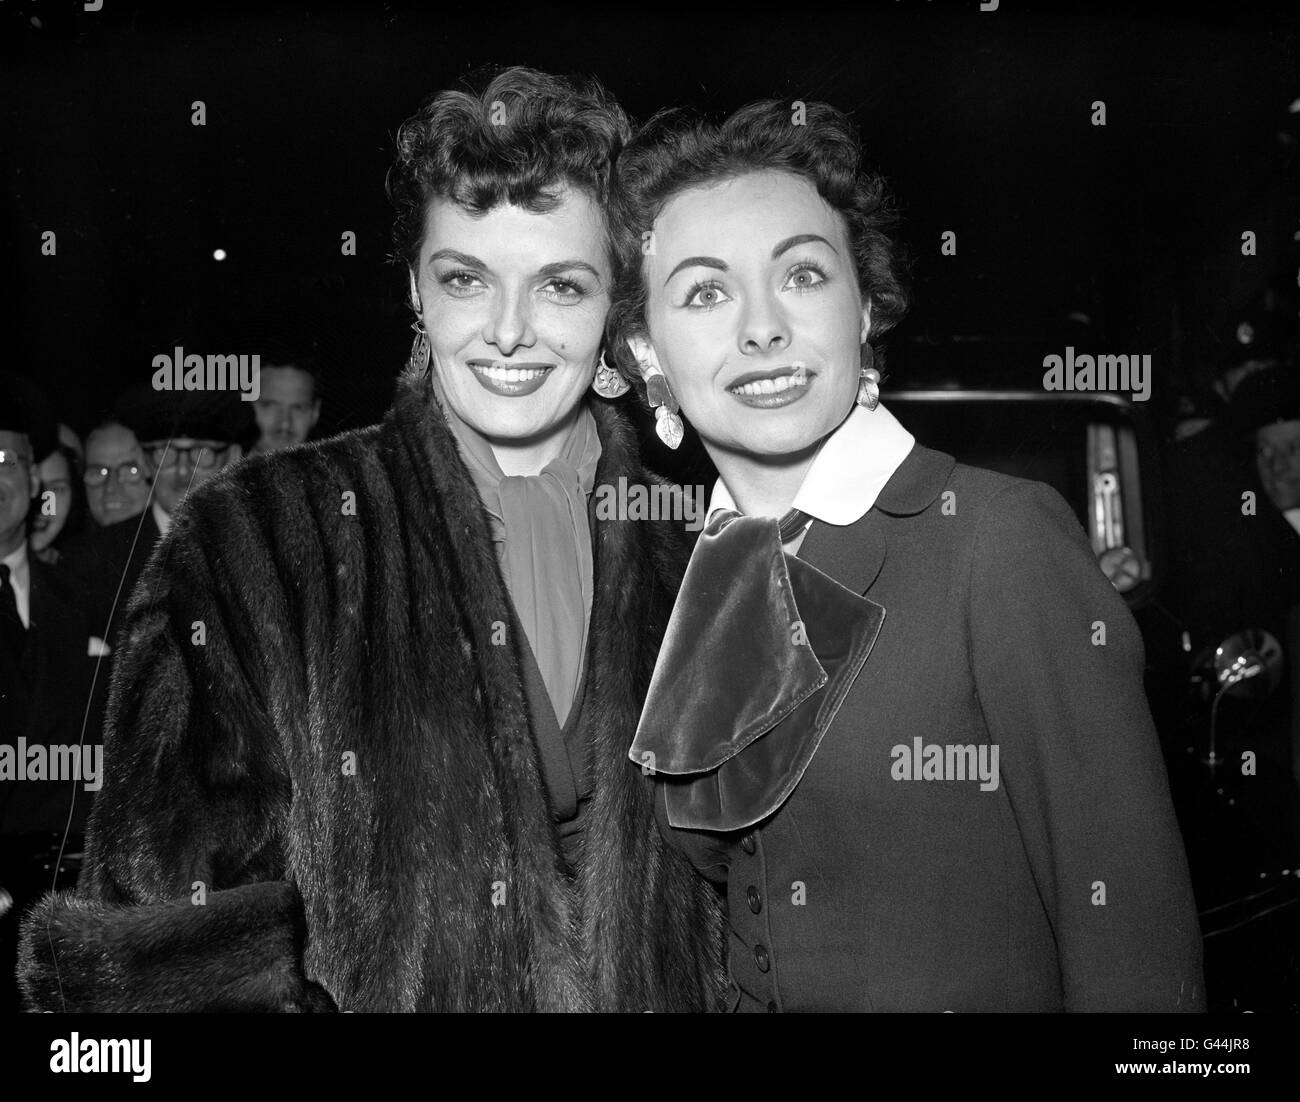 American actress's Jane Russell (left) and Jeanne Crain during a reception at the Dorchester Hotel, London. They have just come to London from Paris for further work on the film 'Gentlemen Marry Brunettes'. Stock Photo